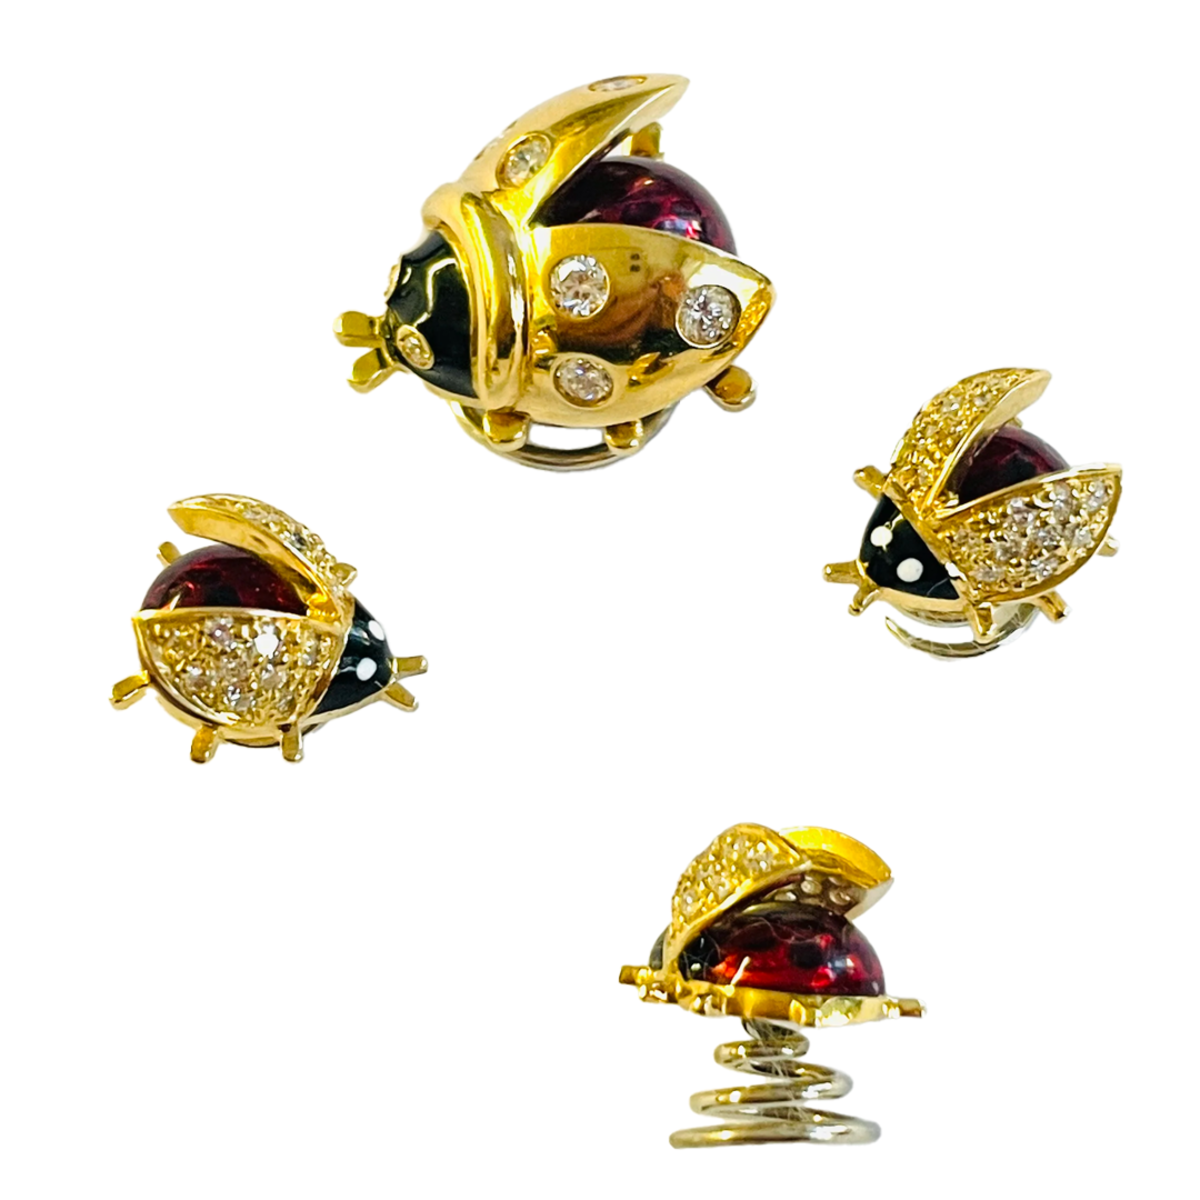 Meister Post-1980s 18KT Yellow Gold Enamel & Diamond Ladybug Brooches front